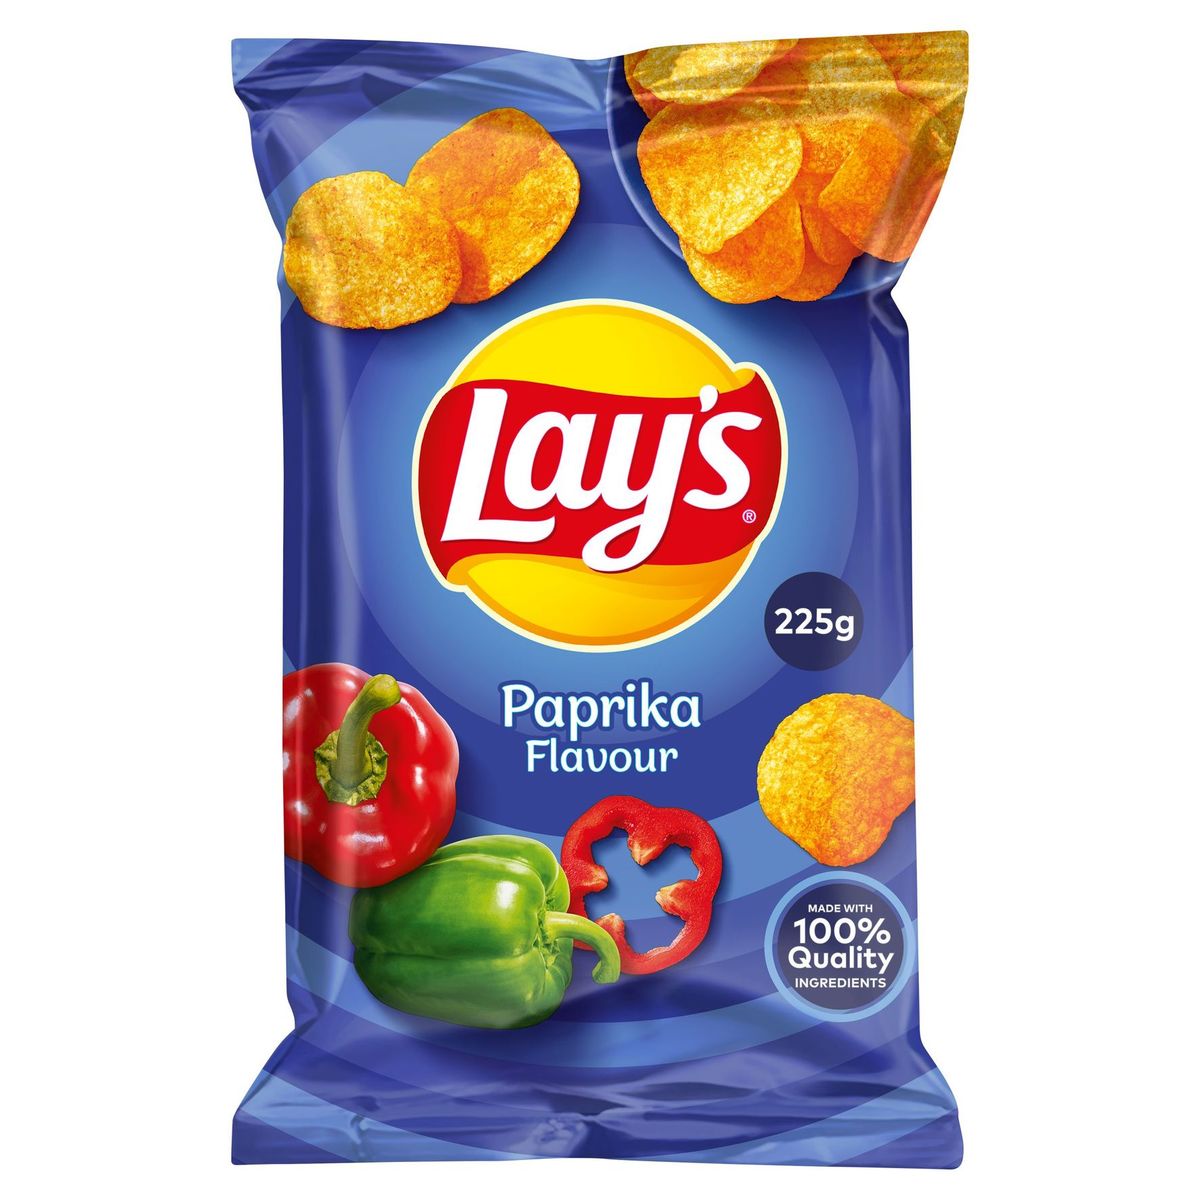 Lay's Aardappelchips Paprika Flavour 225g